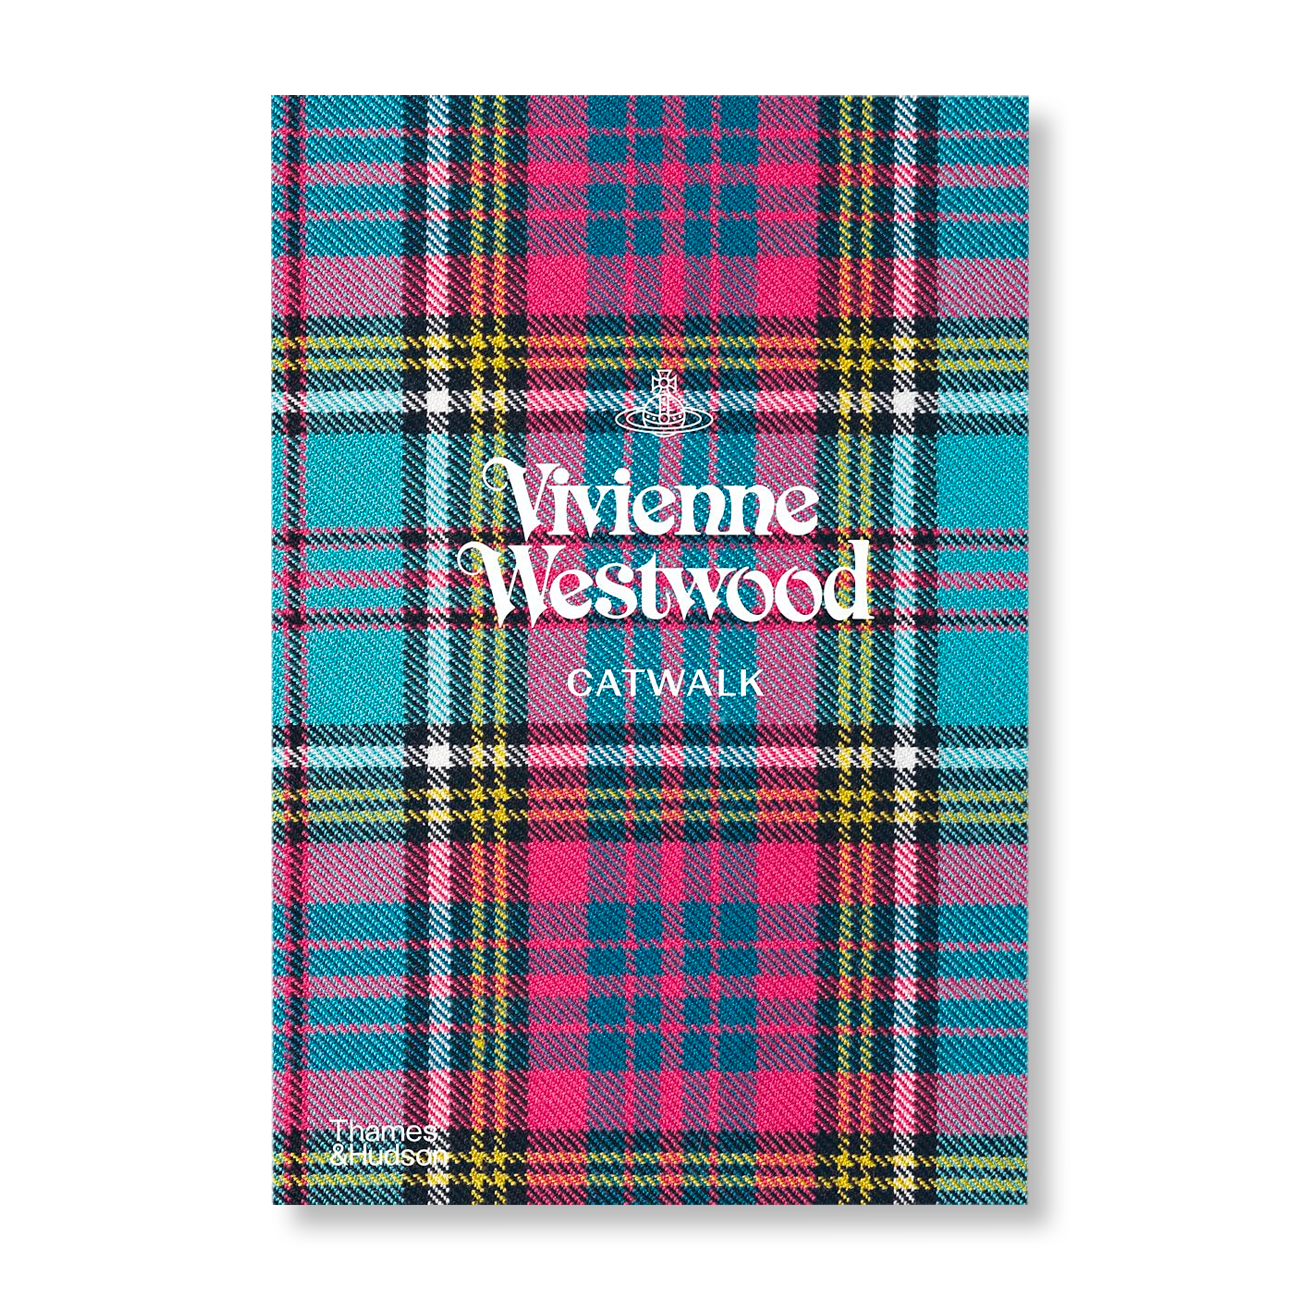 Vivienne Westwood Catwalk: The Complete Collections - The Book Merchant  Jenkins